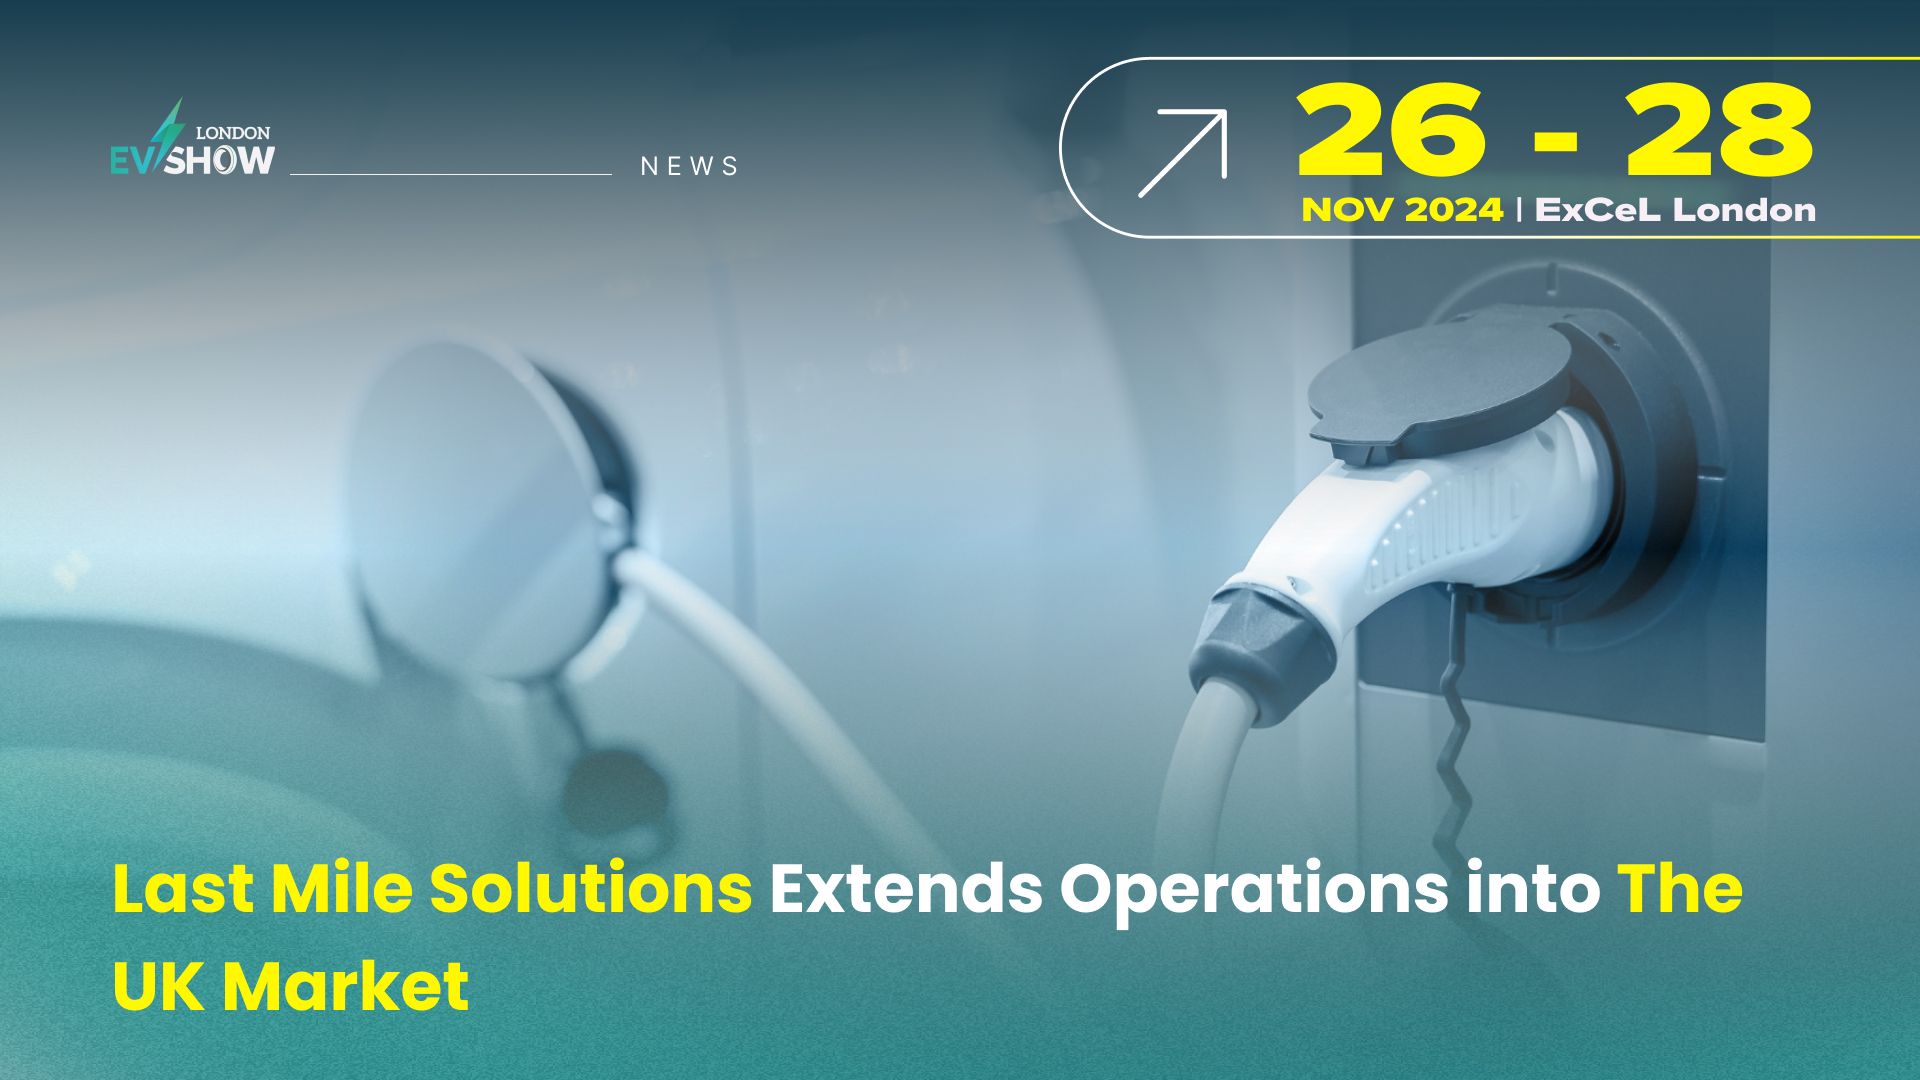 Last Mile Solutions Extends Operations into The UK Market